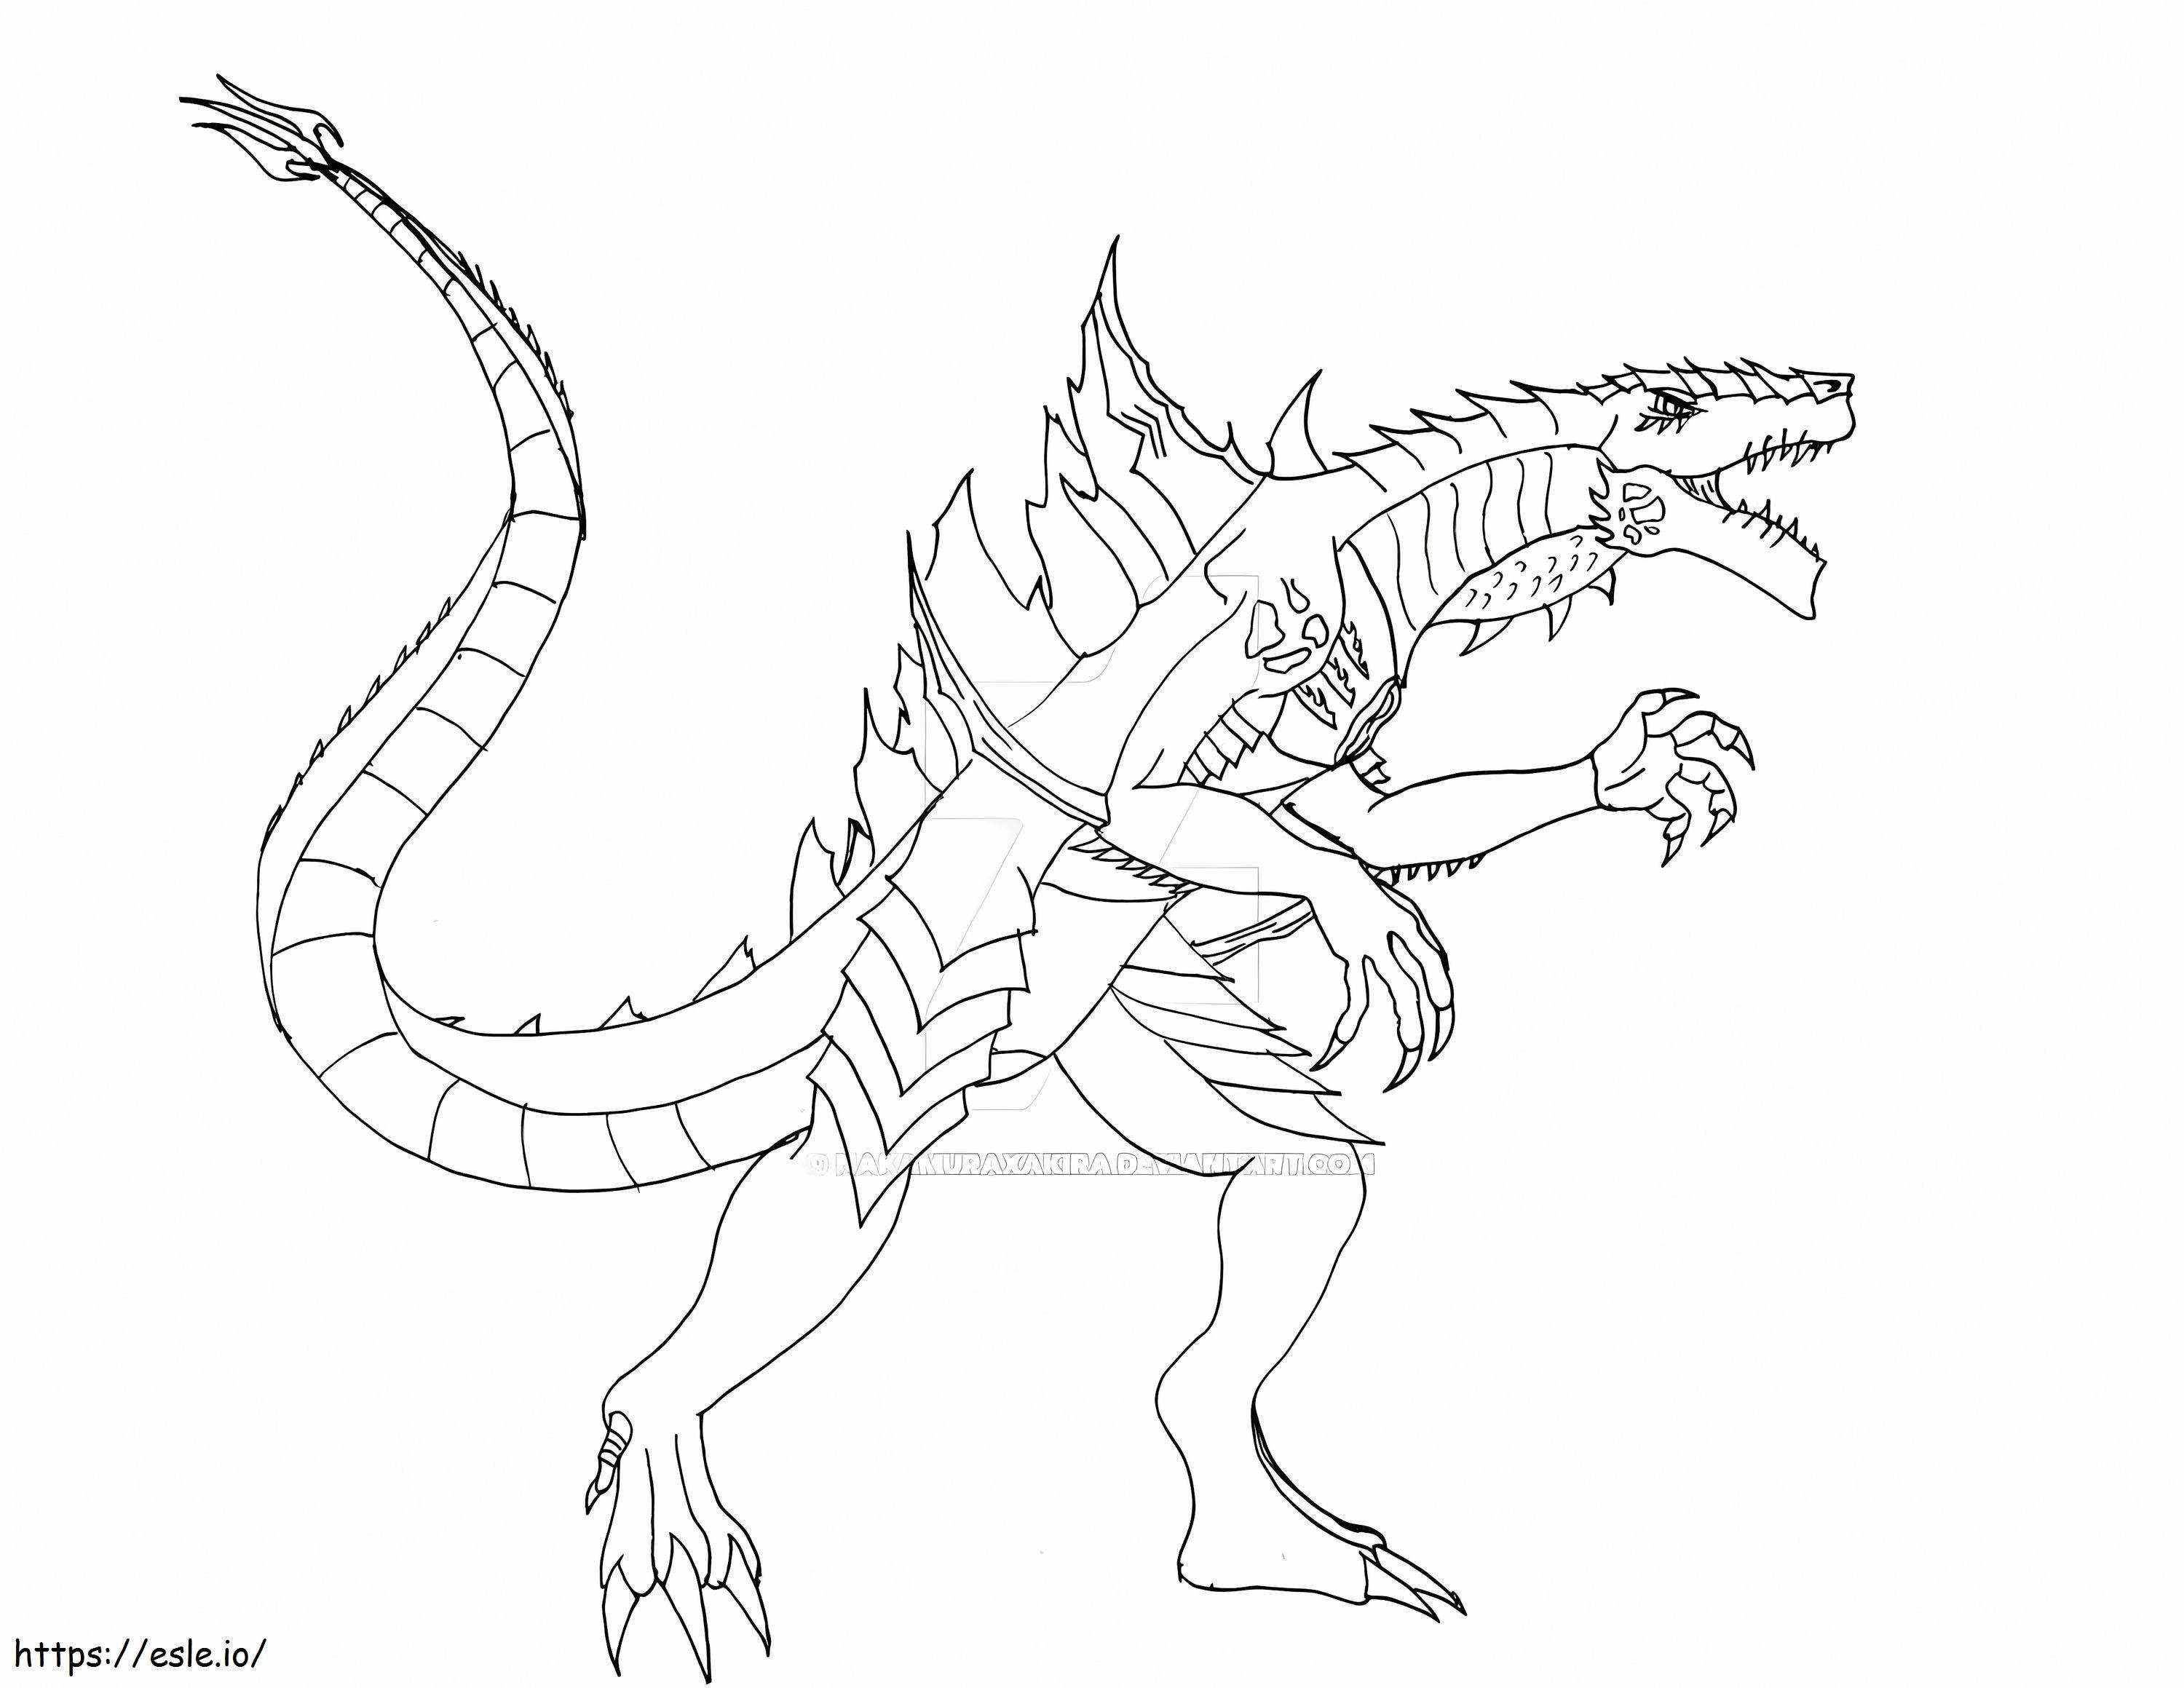 1548755772 Primus Zilla Data And Whole View By Nakamuraxakira D67Bqp5 coloring page